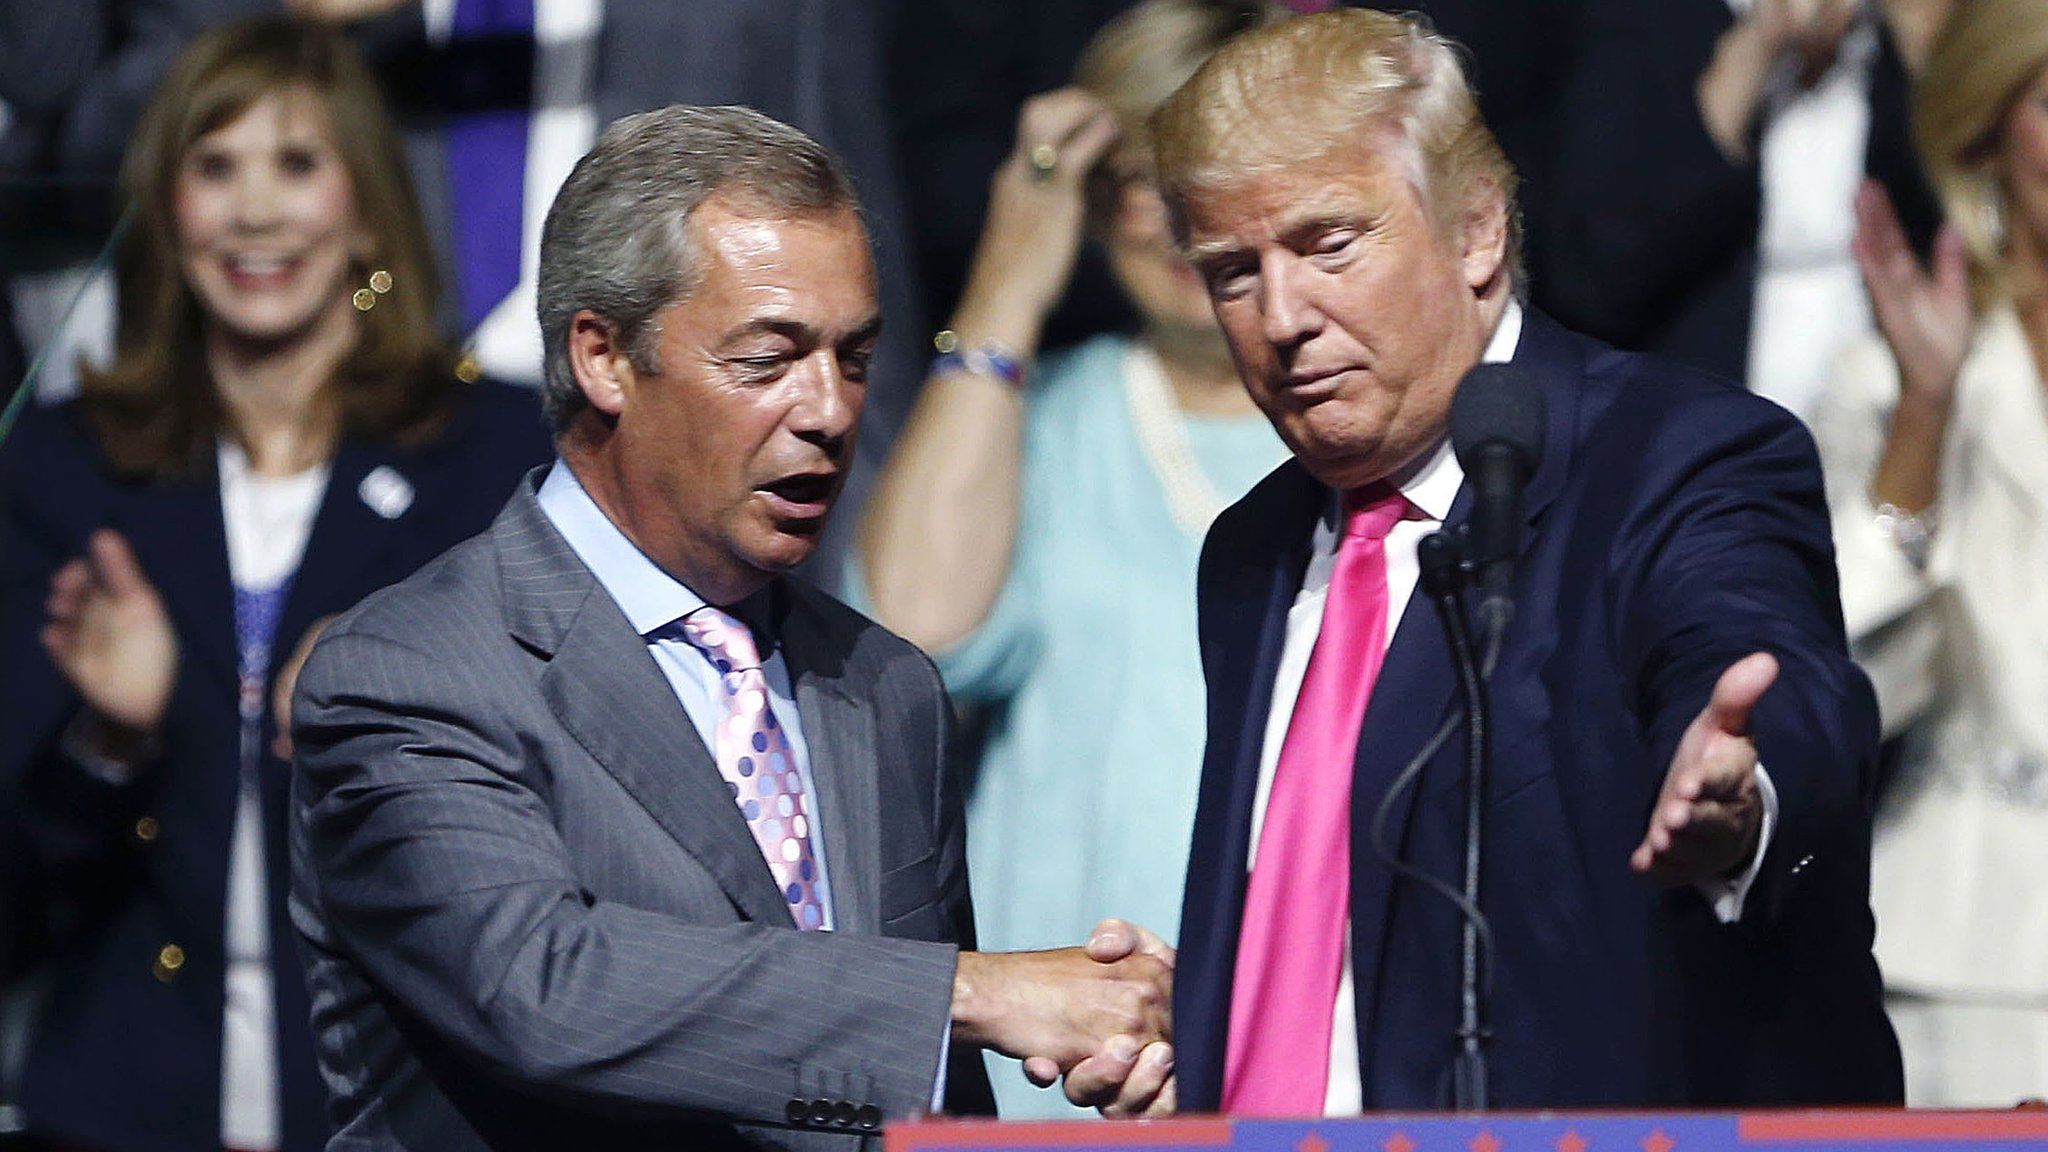 Nigel Farage and Donald Trump during a US presidential election campaign rally